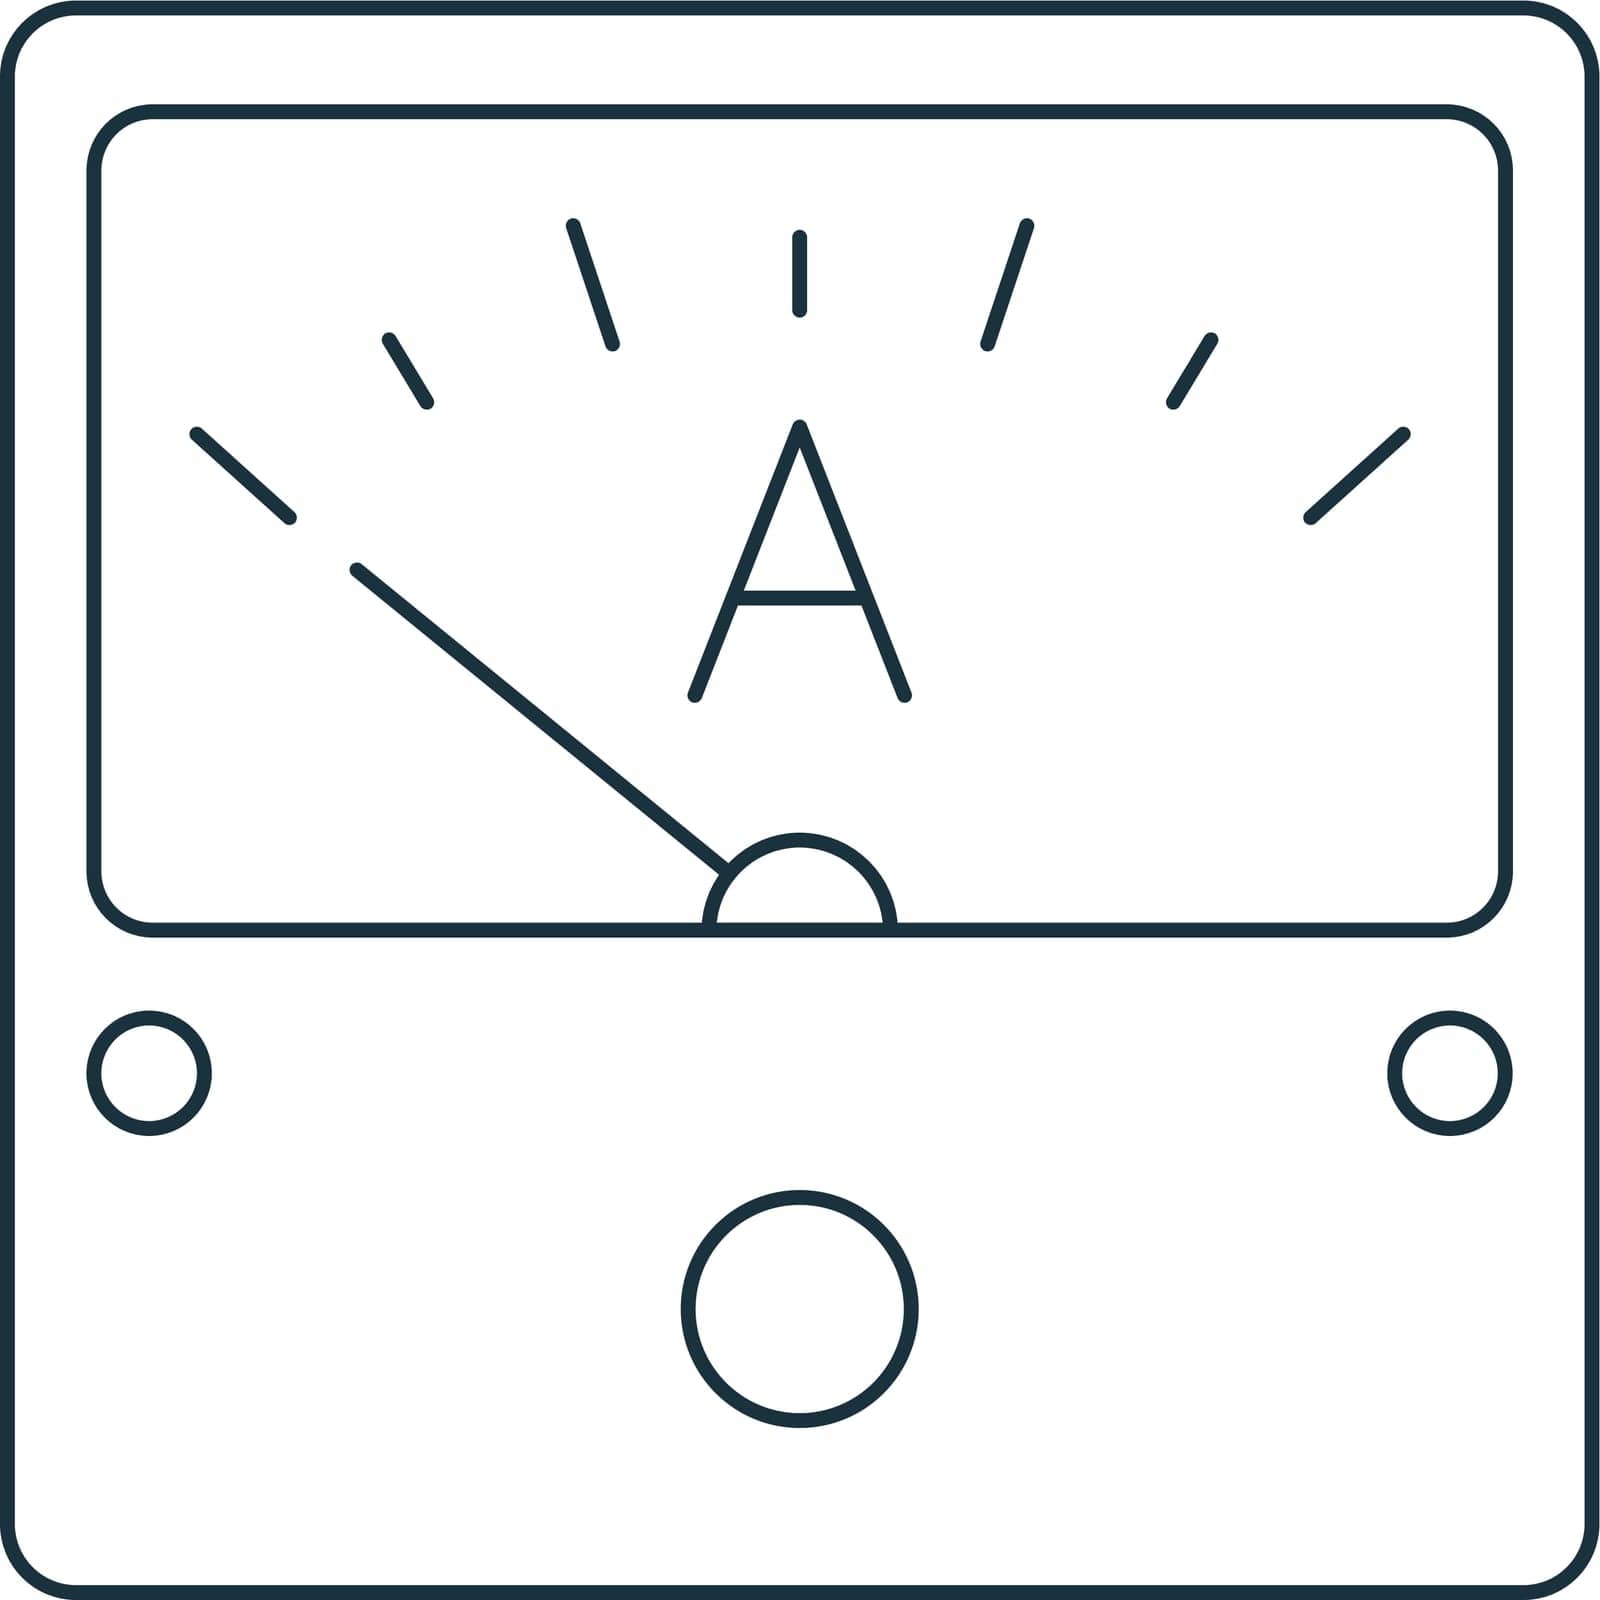 Ampere meter icon. Monochrome simple sign from construction instruments collection. Ampere meter icon for logo, templates, web design and infographics